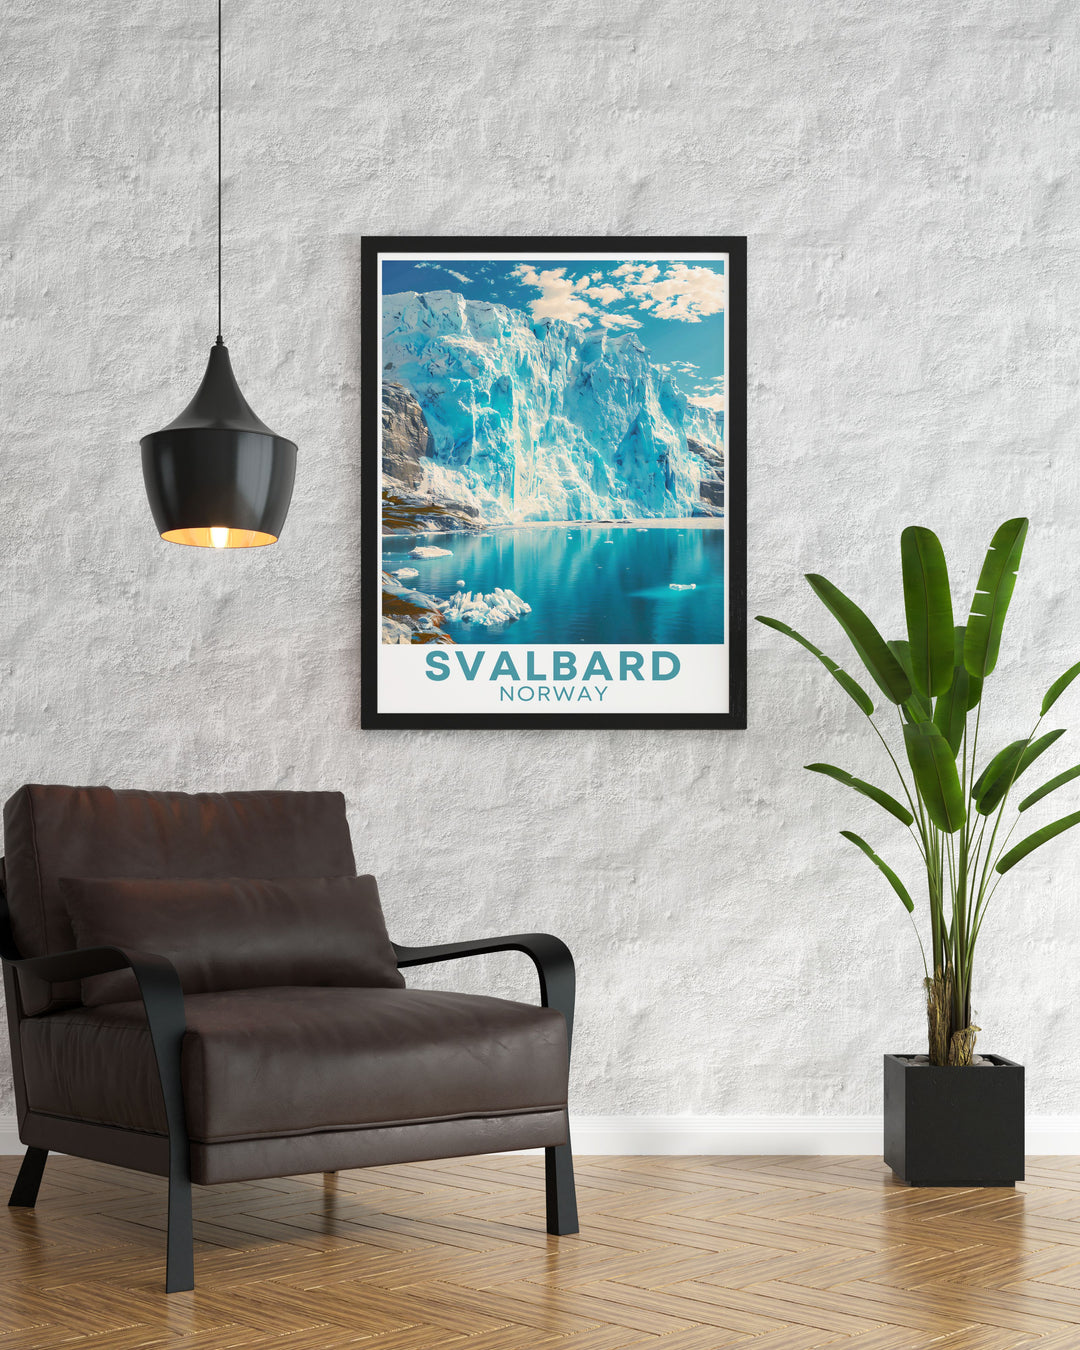 Modern Nordenskiold Glacier framed prints designed to enhance any living room decor. This Svalbard artwork captures the glaciers grandeur making it a perfect wall decor piece and a unique gift for nature and art lovers.